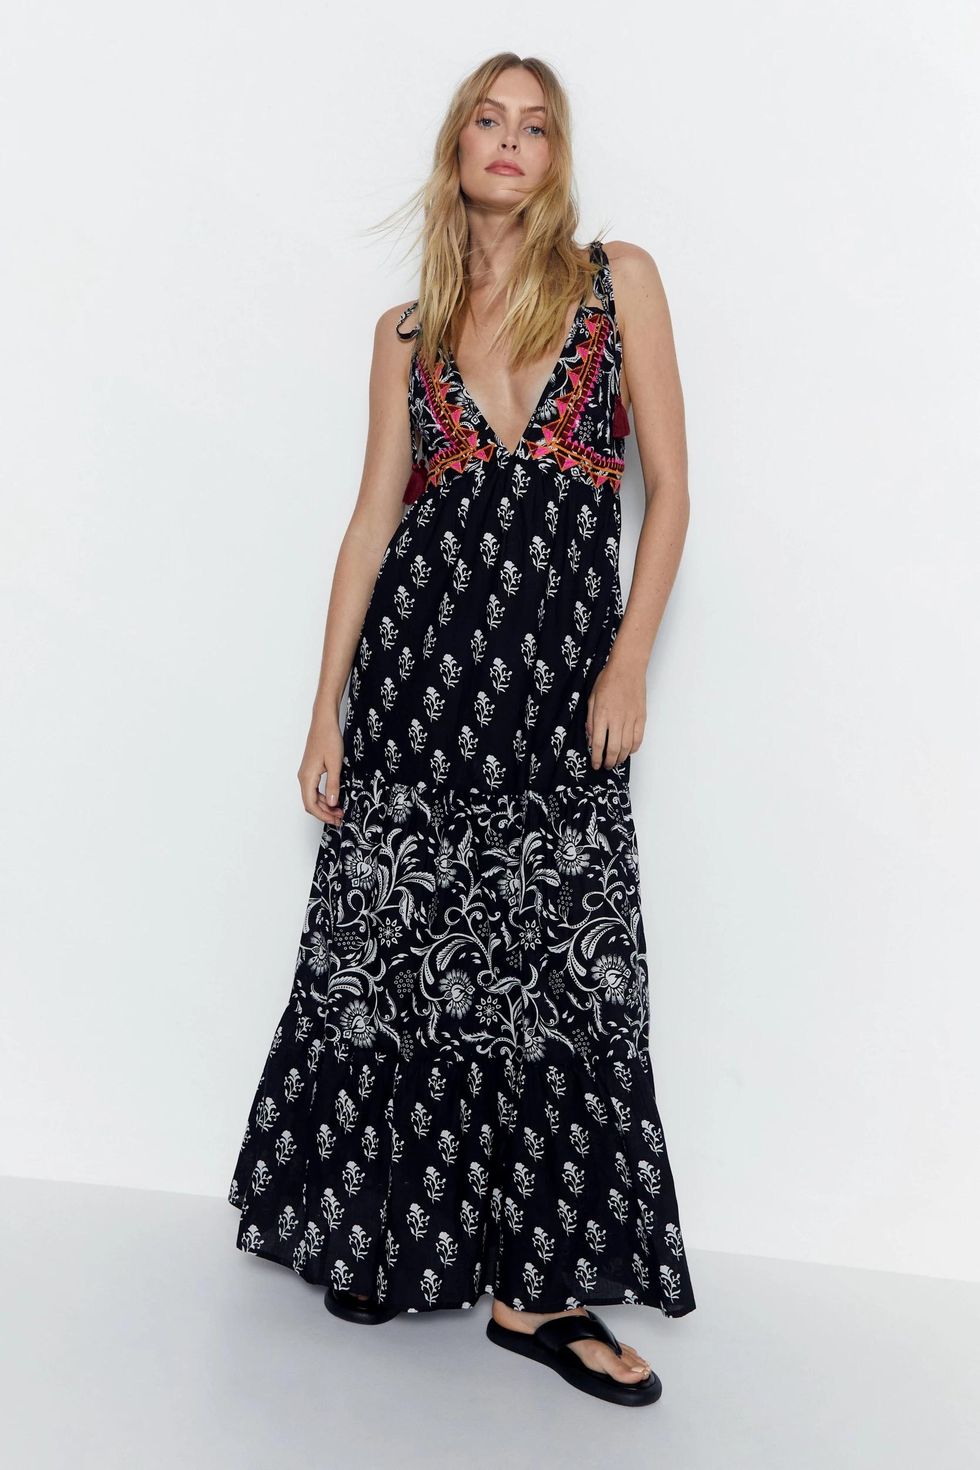 Paisley Mixed Print Embroidered Tassel Tie Maxi Dress